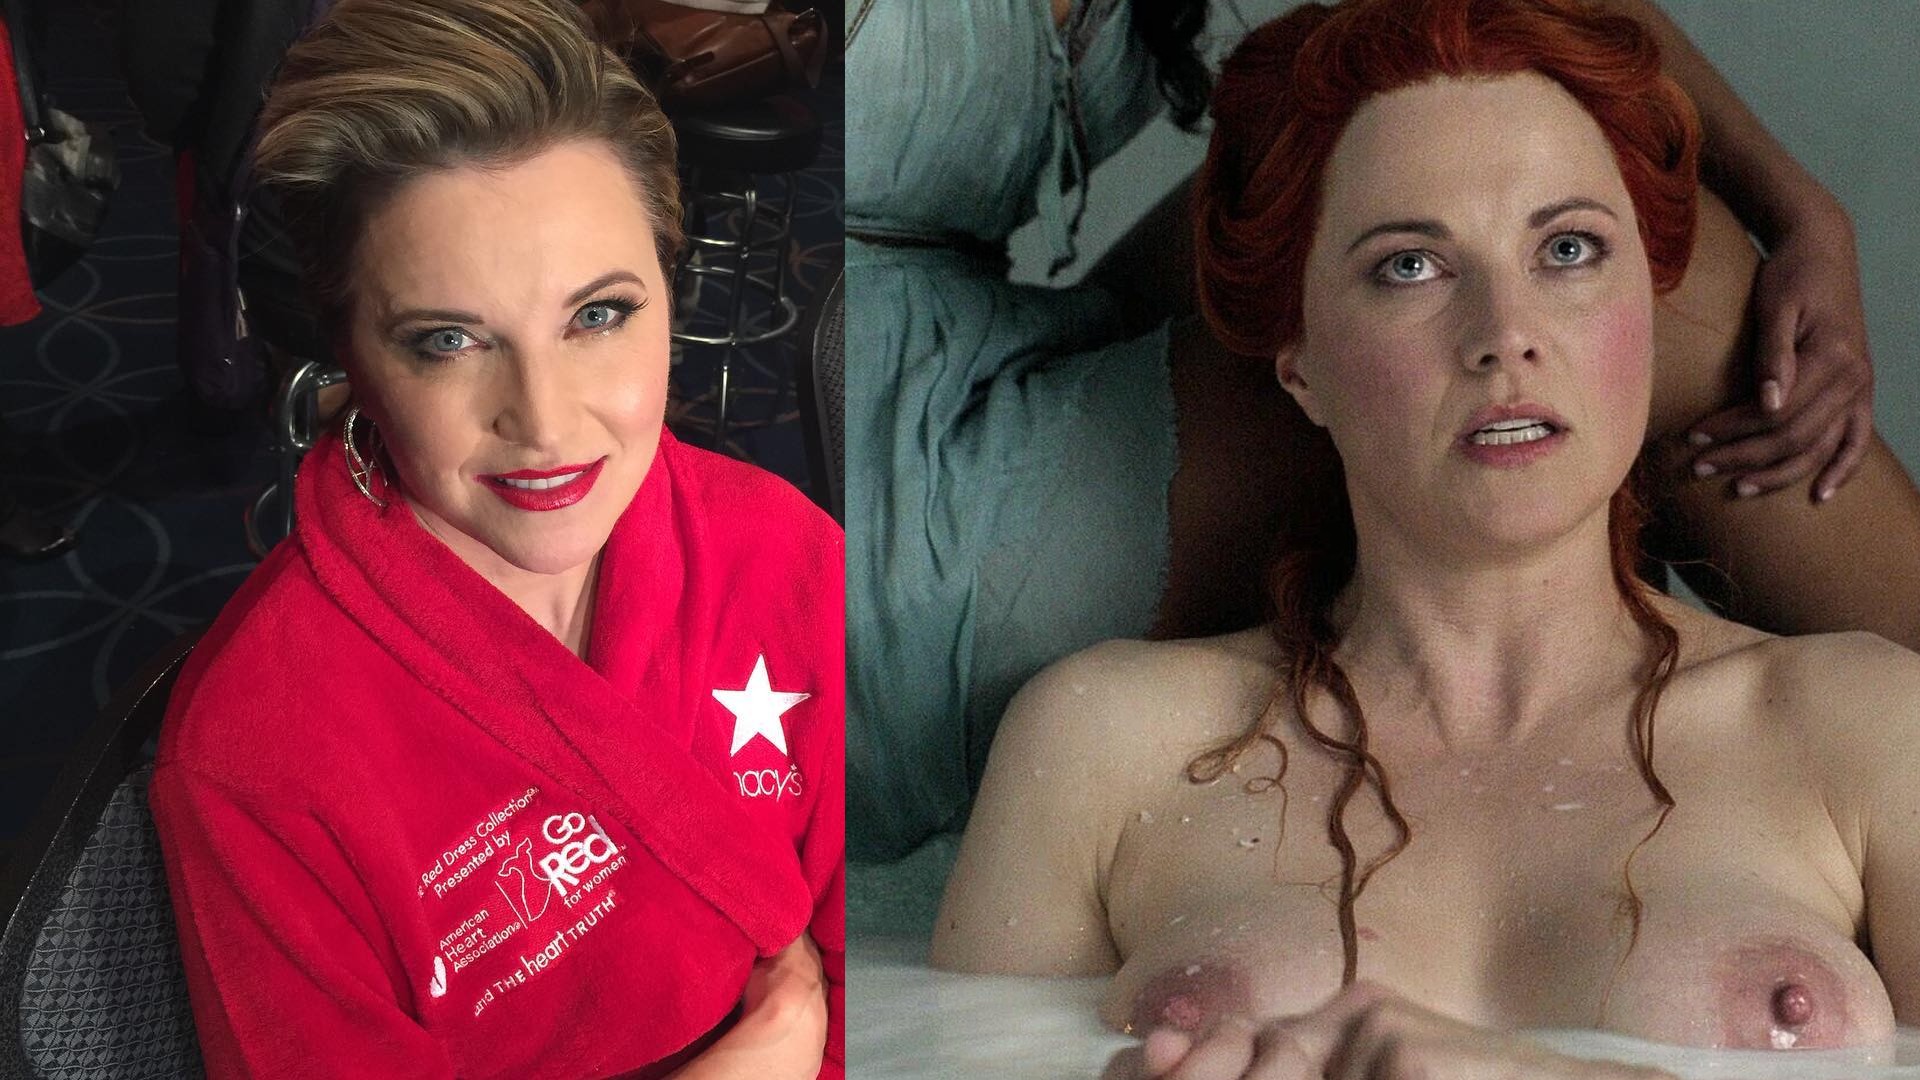 caroline franzen recommends lucy lawless nude images pic